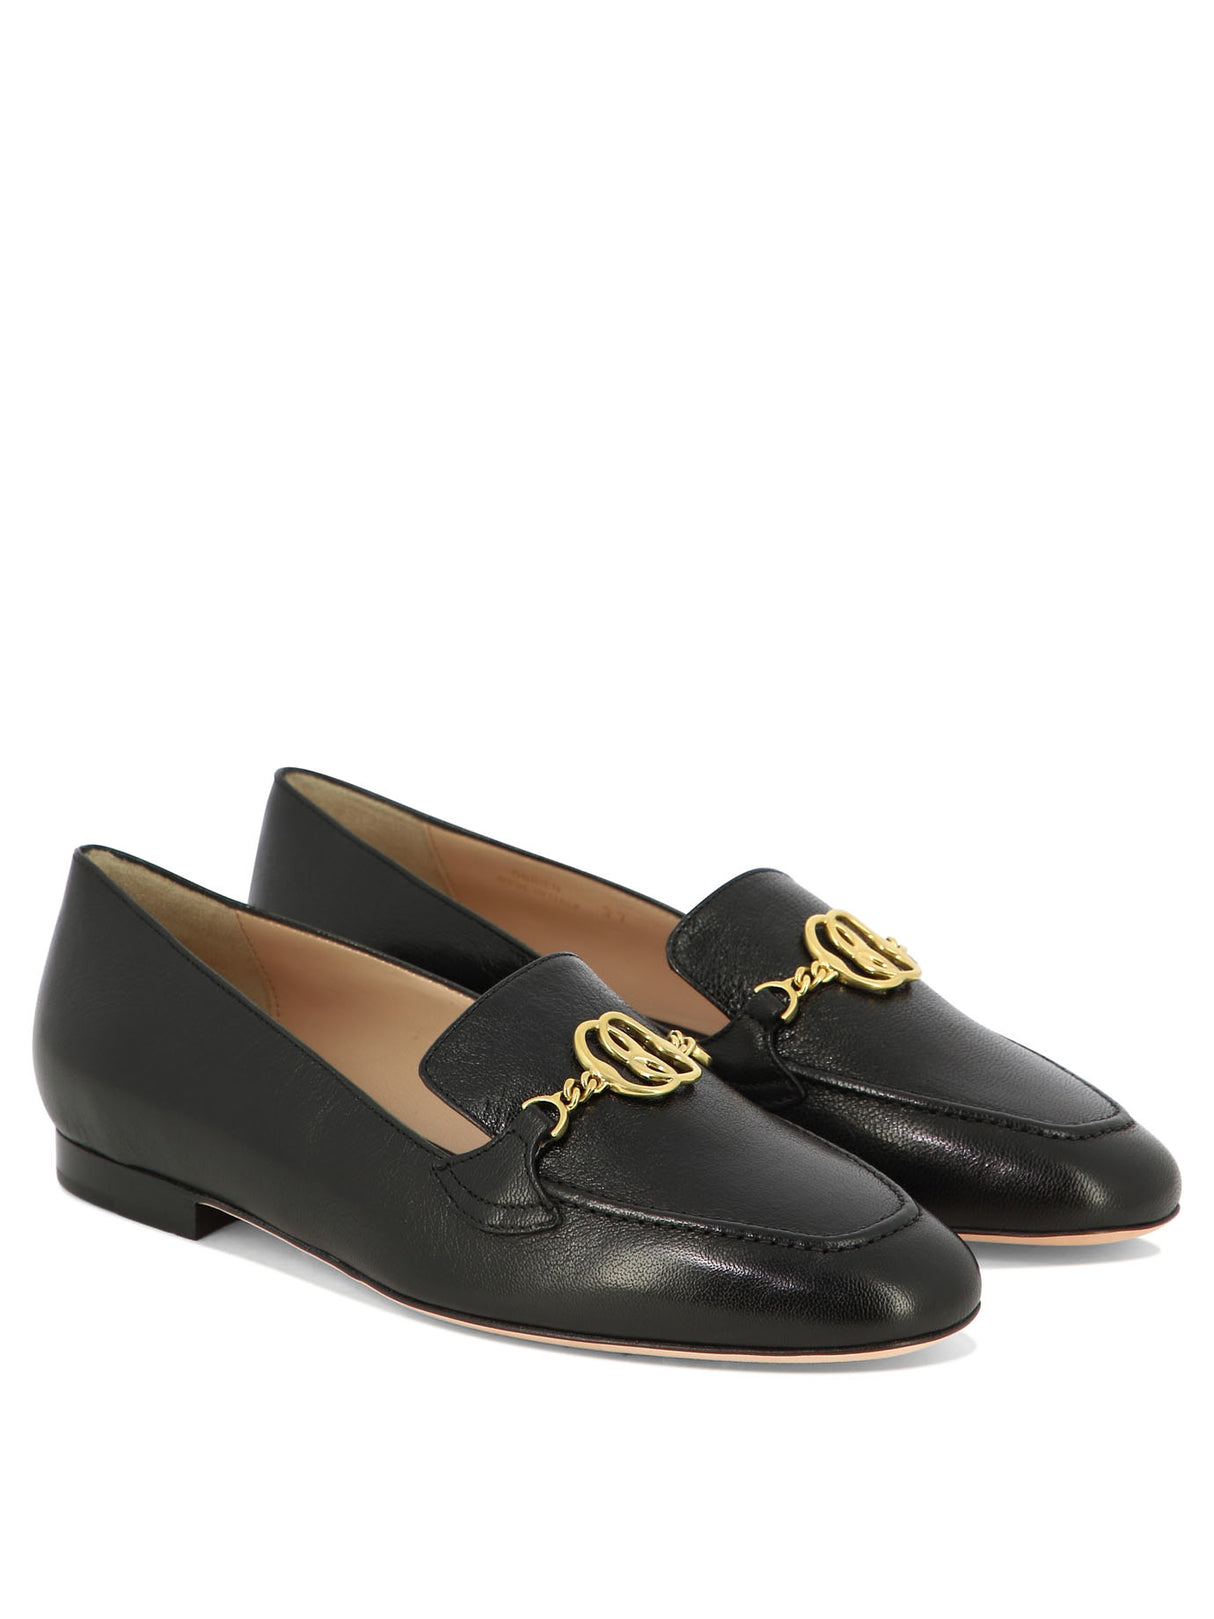 BALLY Men's Black Leather Loafers for FW23 Season